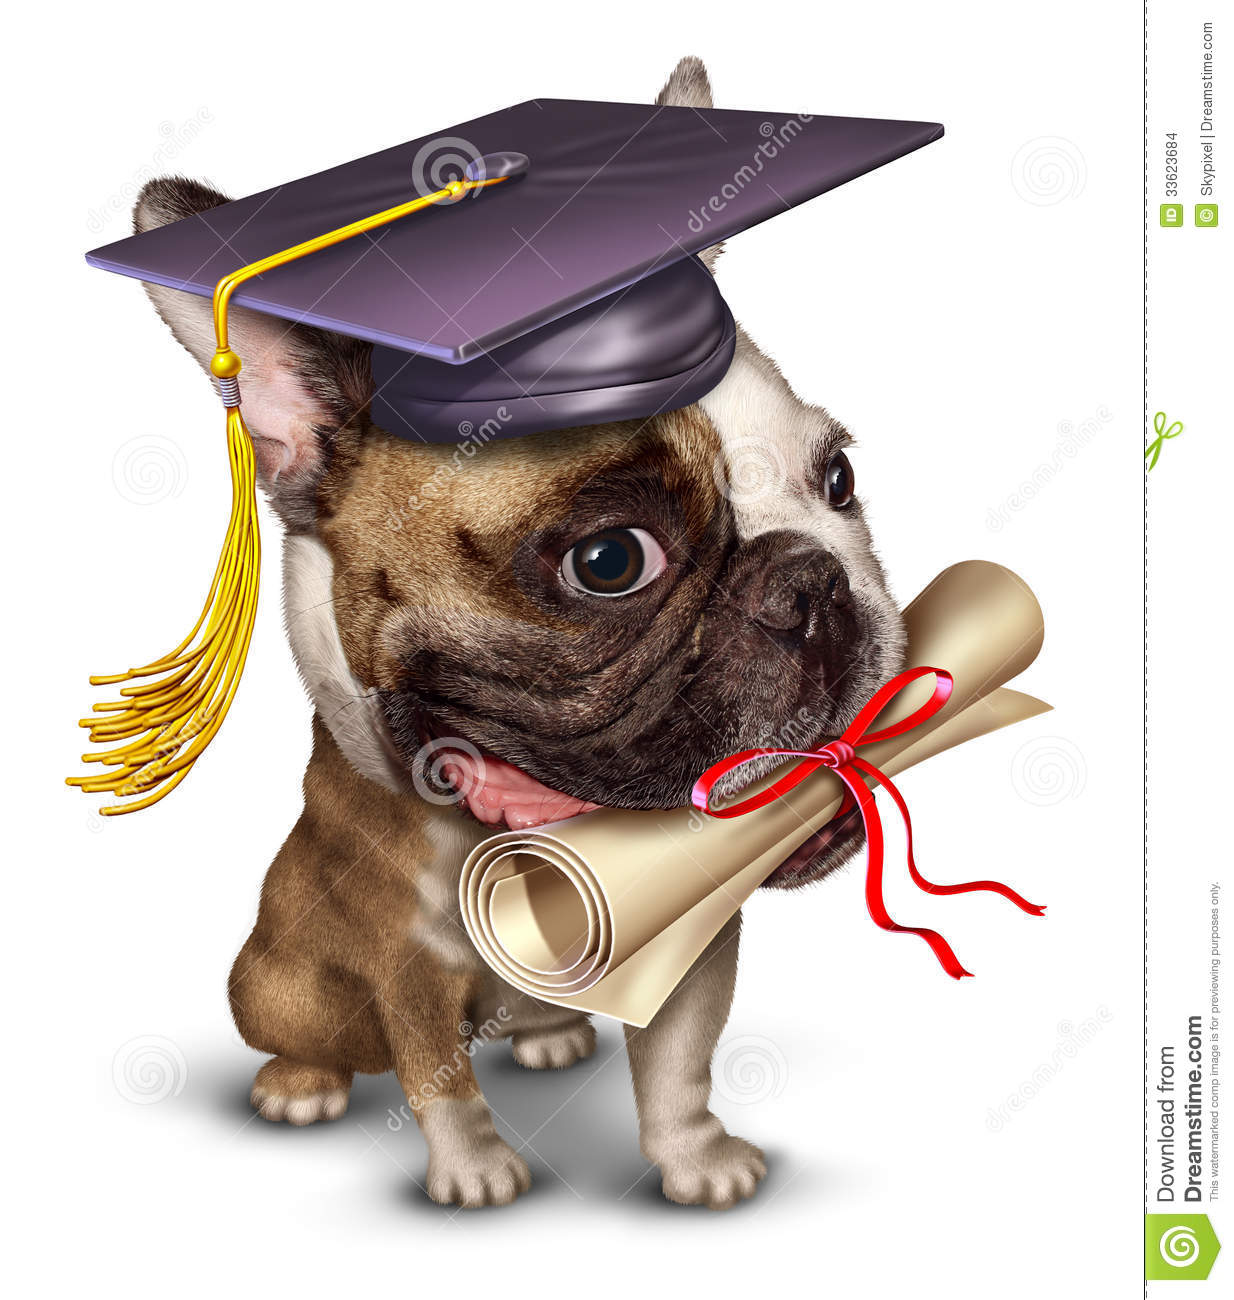 Dog Training Pet School Concept With A Bull Dog Wearing A Graduation